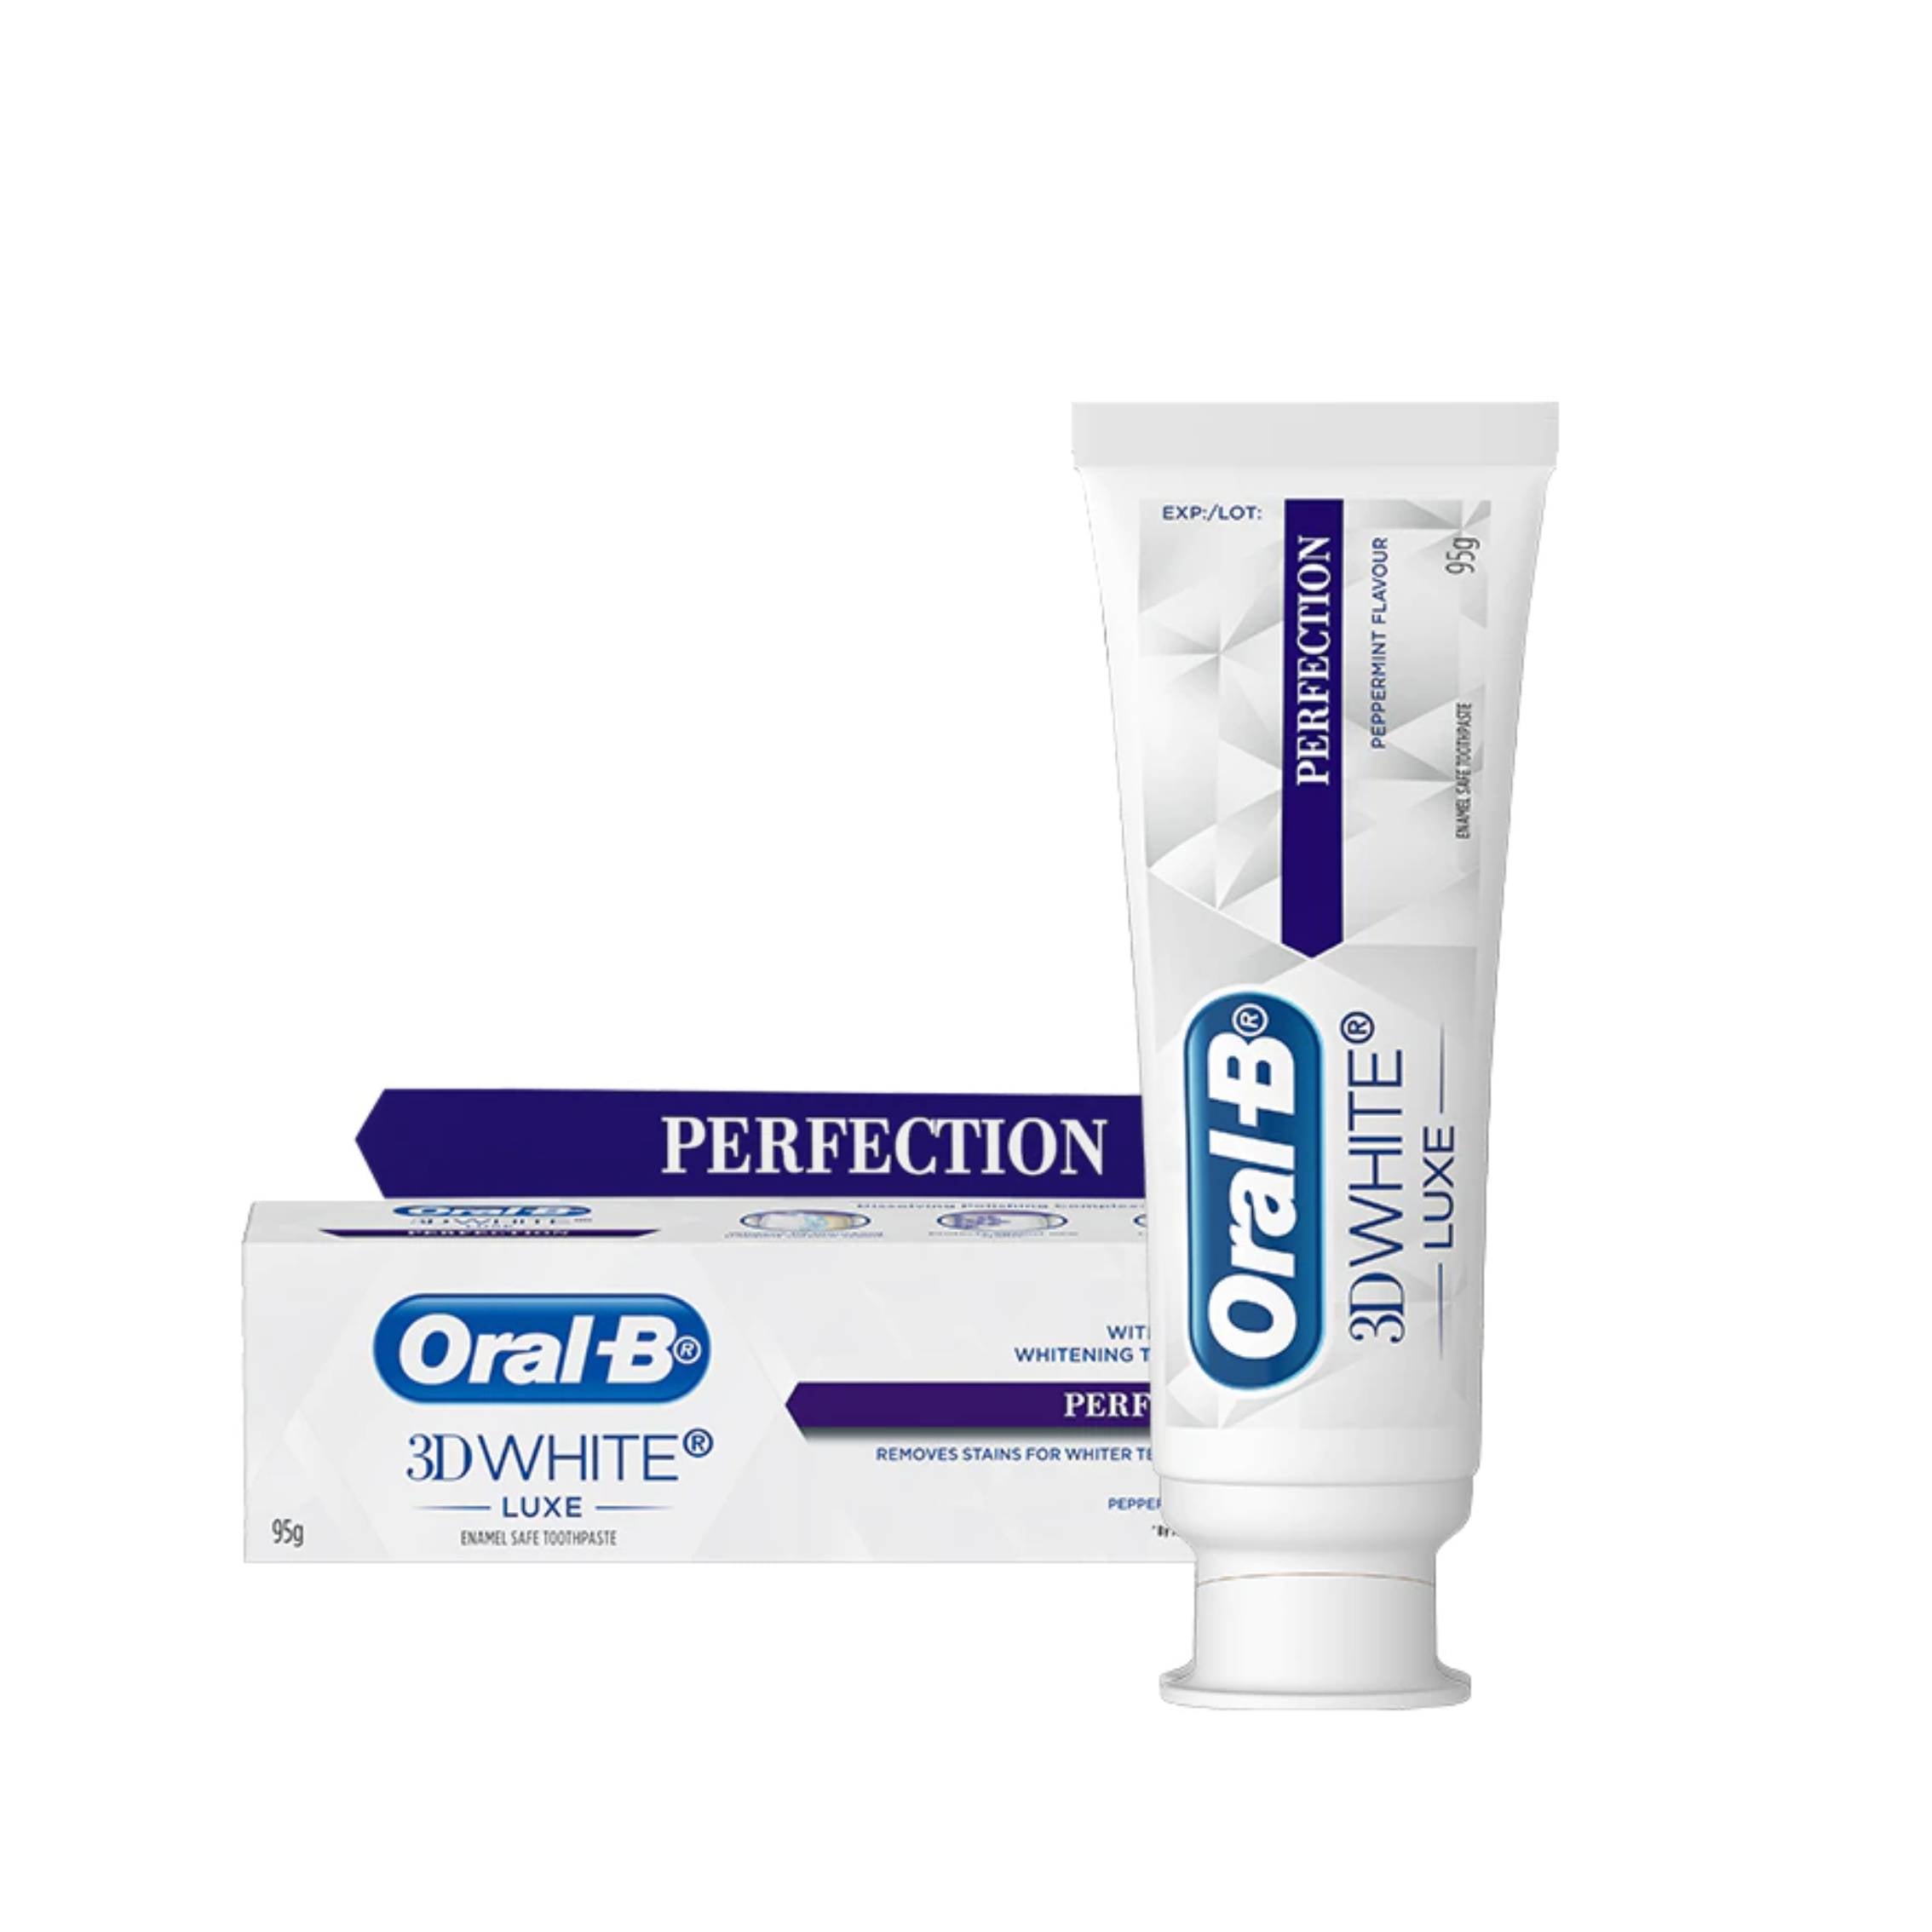 Oral B 3D White Lux Perfection Toothpaste 95g - DoctorOnCall Online Pharmacy